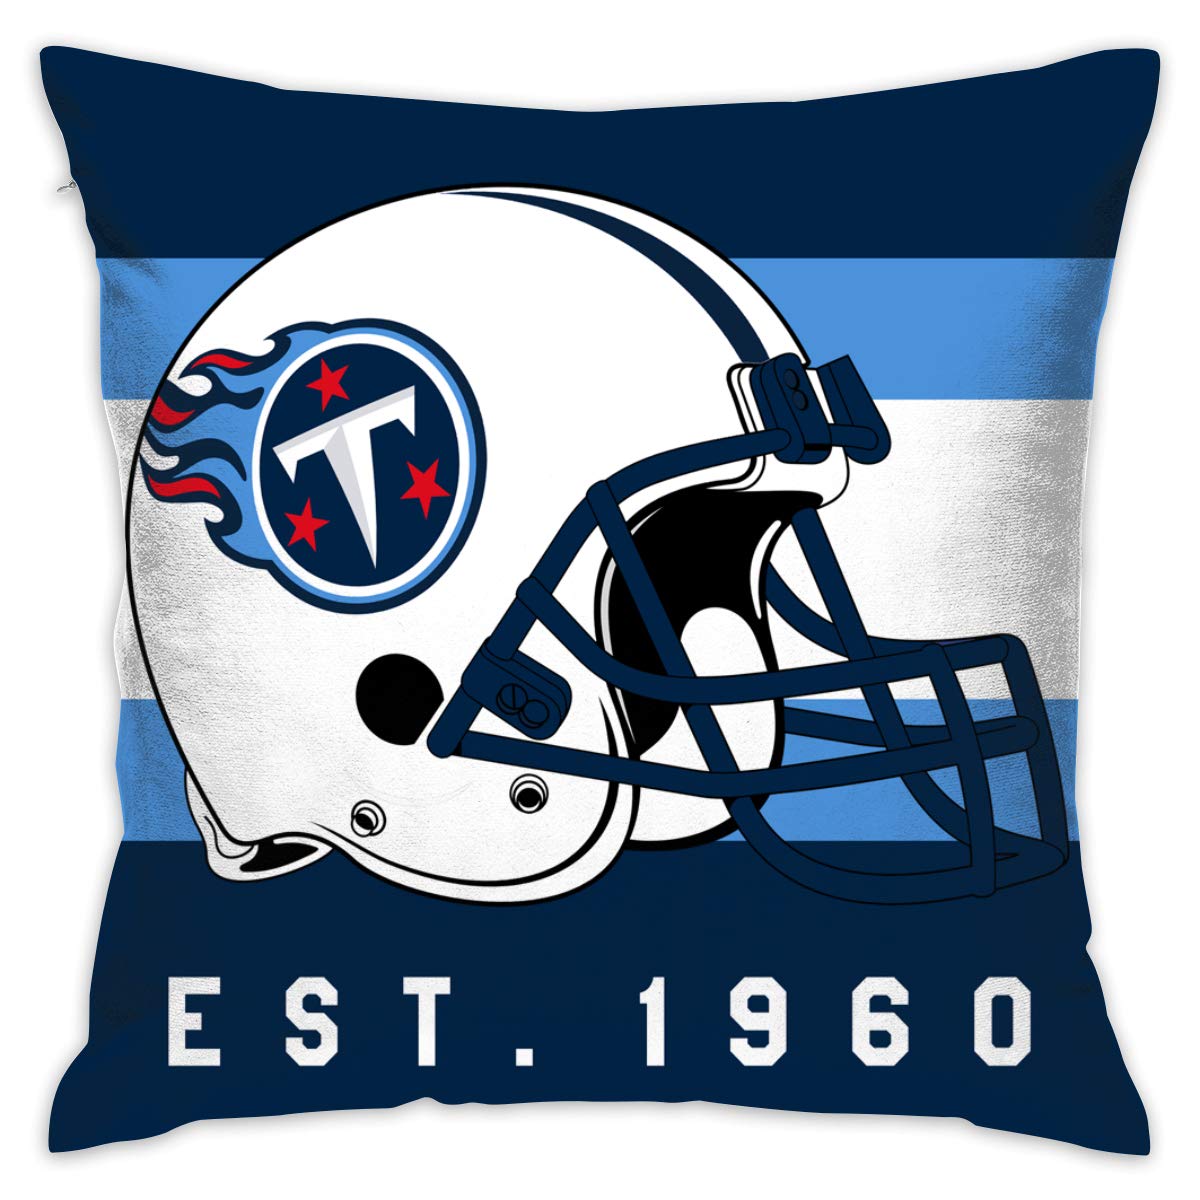 Personalized Football Tennessee Titans Design Pillowcase Decorative Throw Pillow Cover